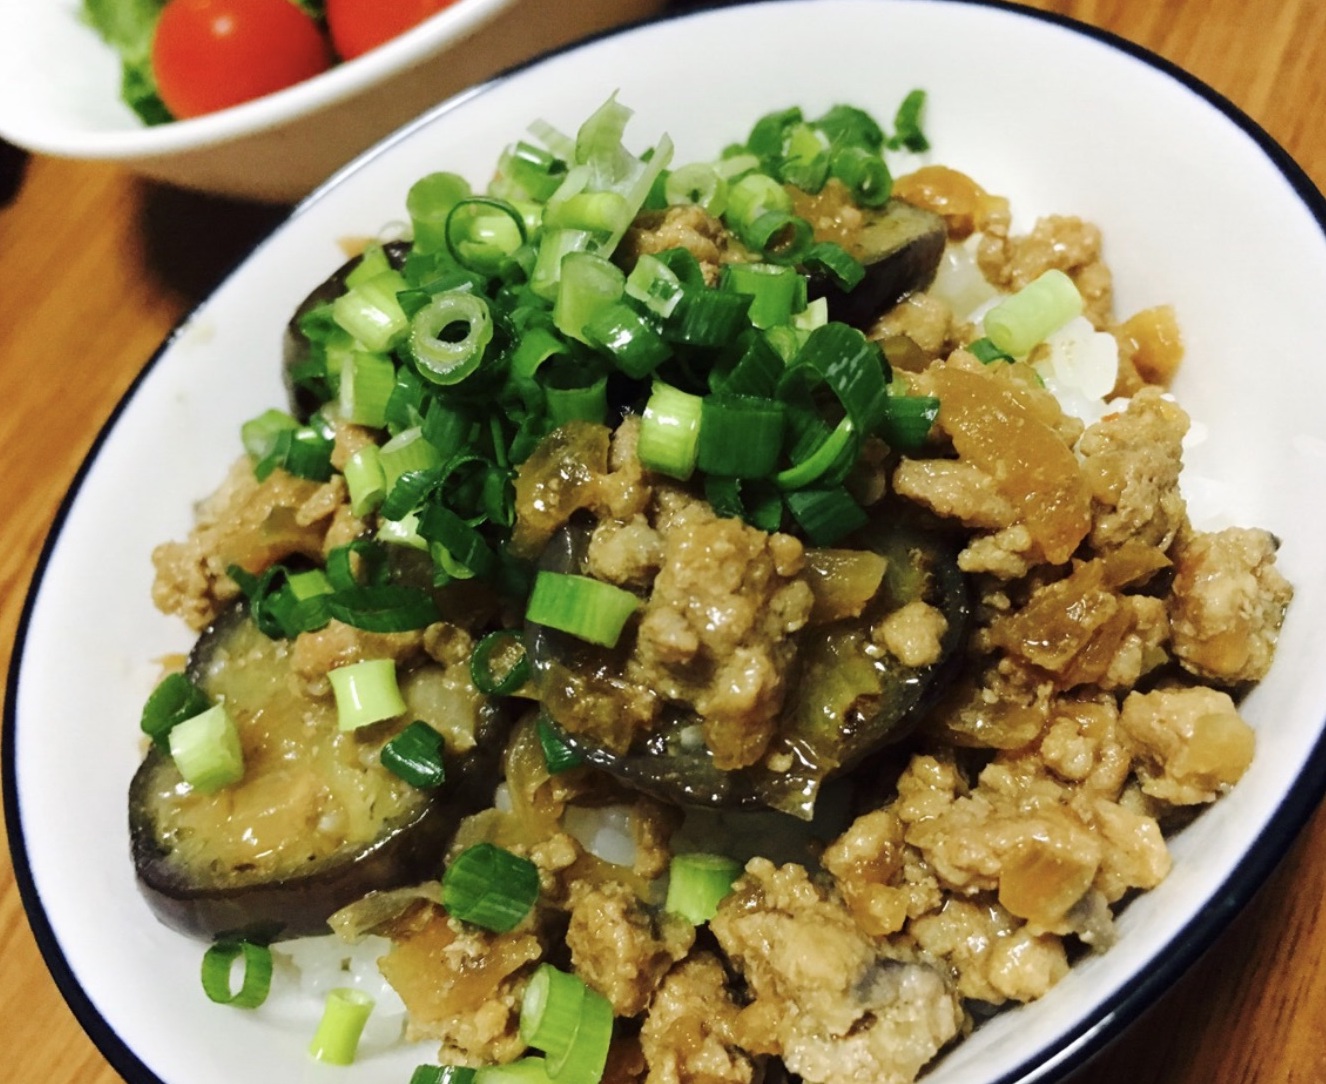 Miso stir-fry with eggplant and ground pork and sliced green onion on top.